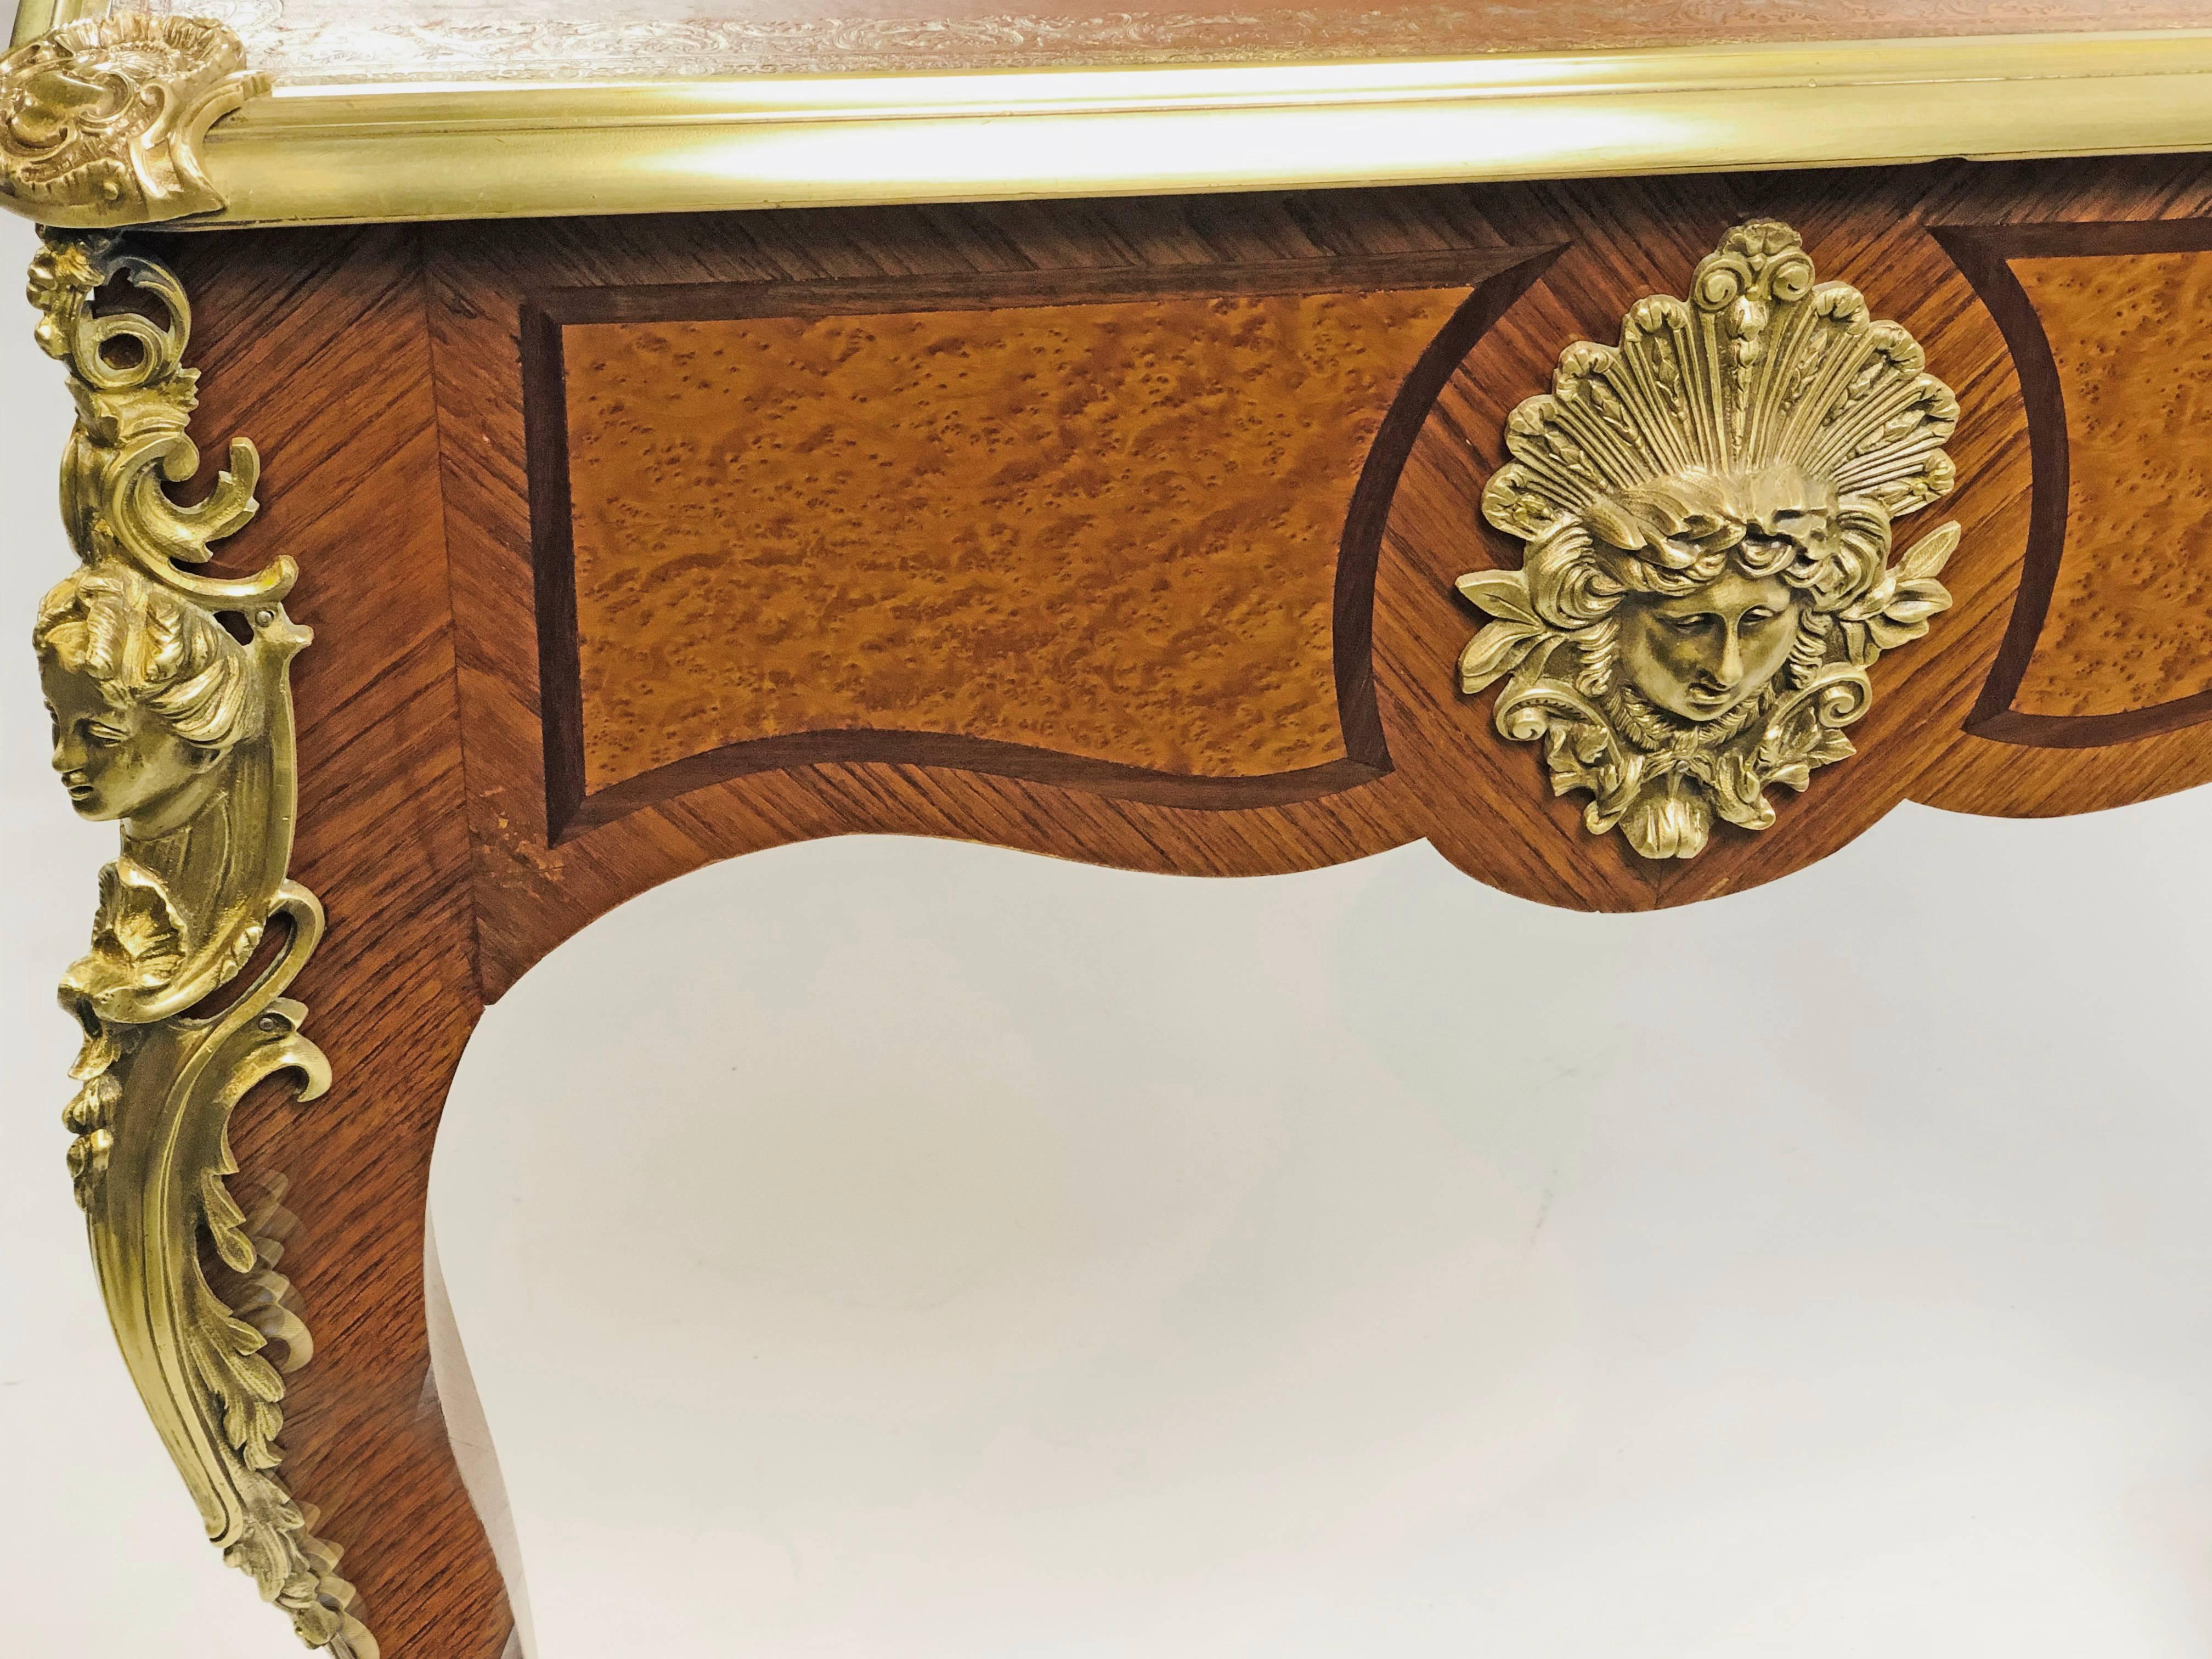 French Desk Bureau Plat 19th Century in the Louis XV Manner